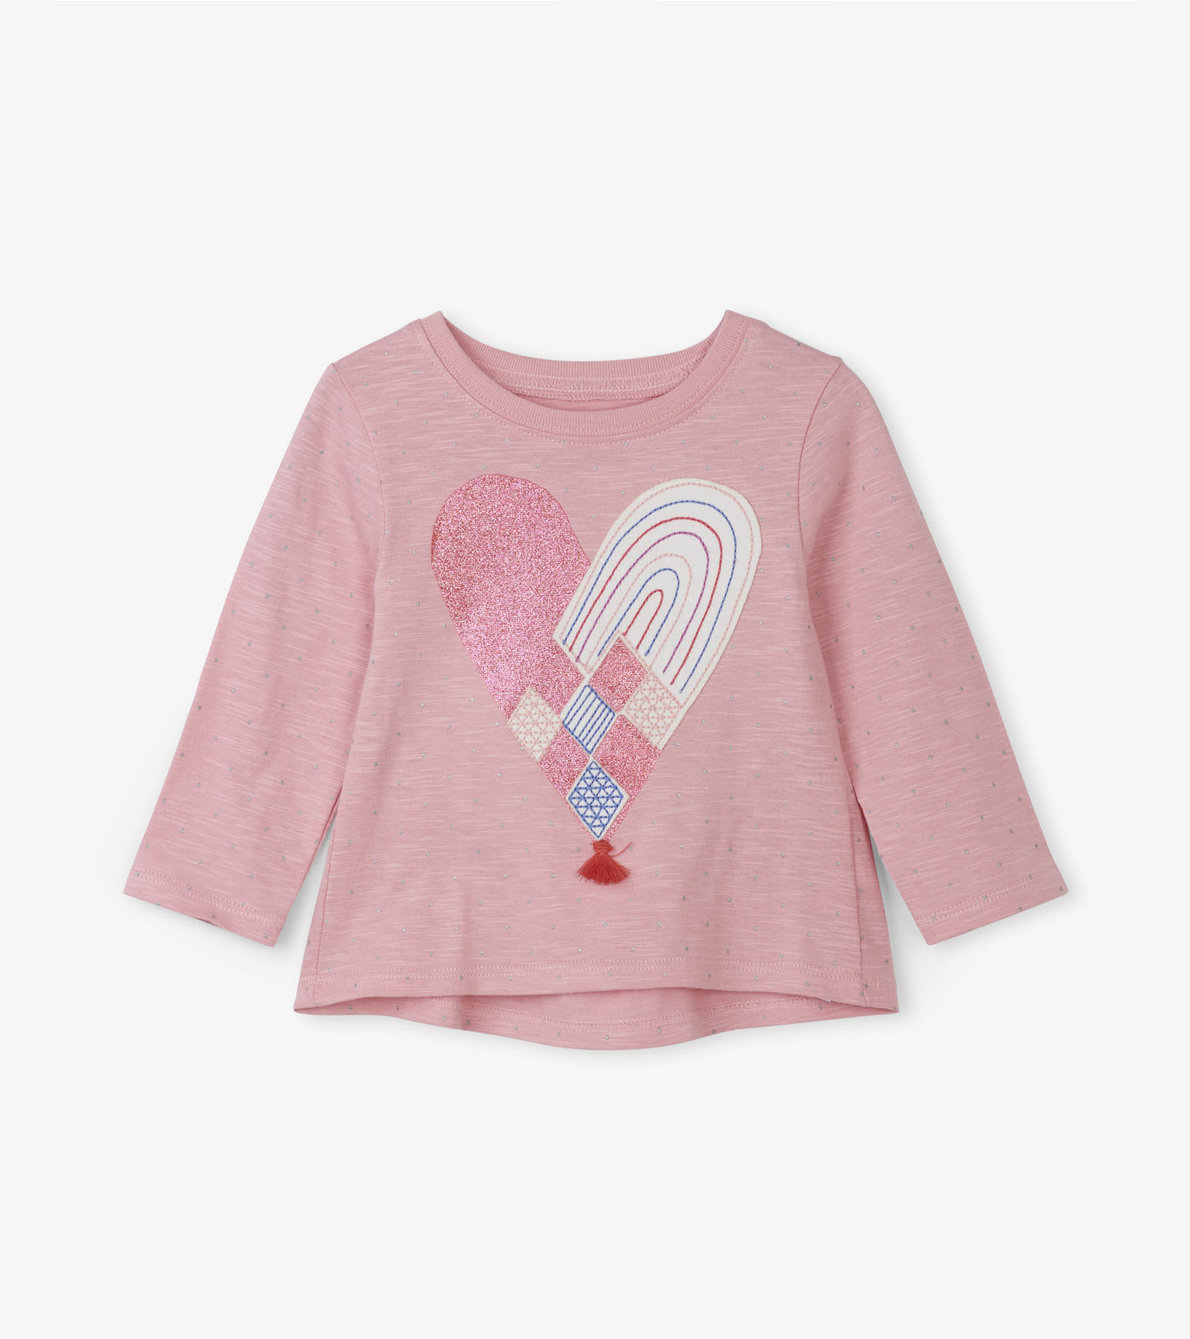 View larger image of Woven Heart Long Sleeve Baby Tee